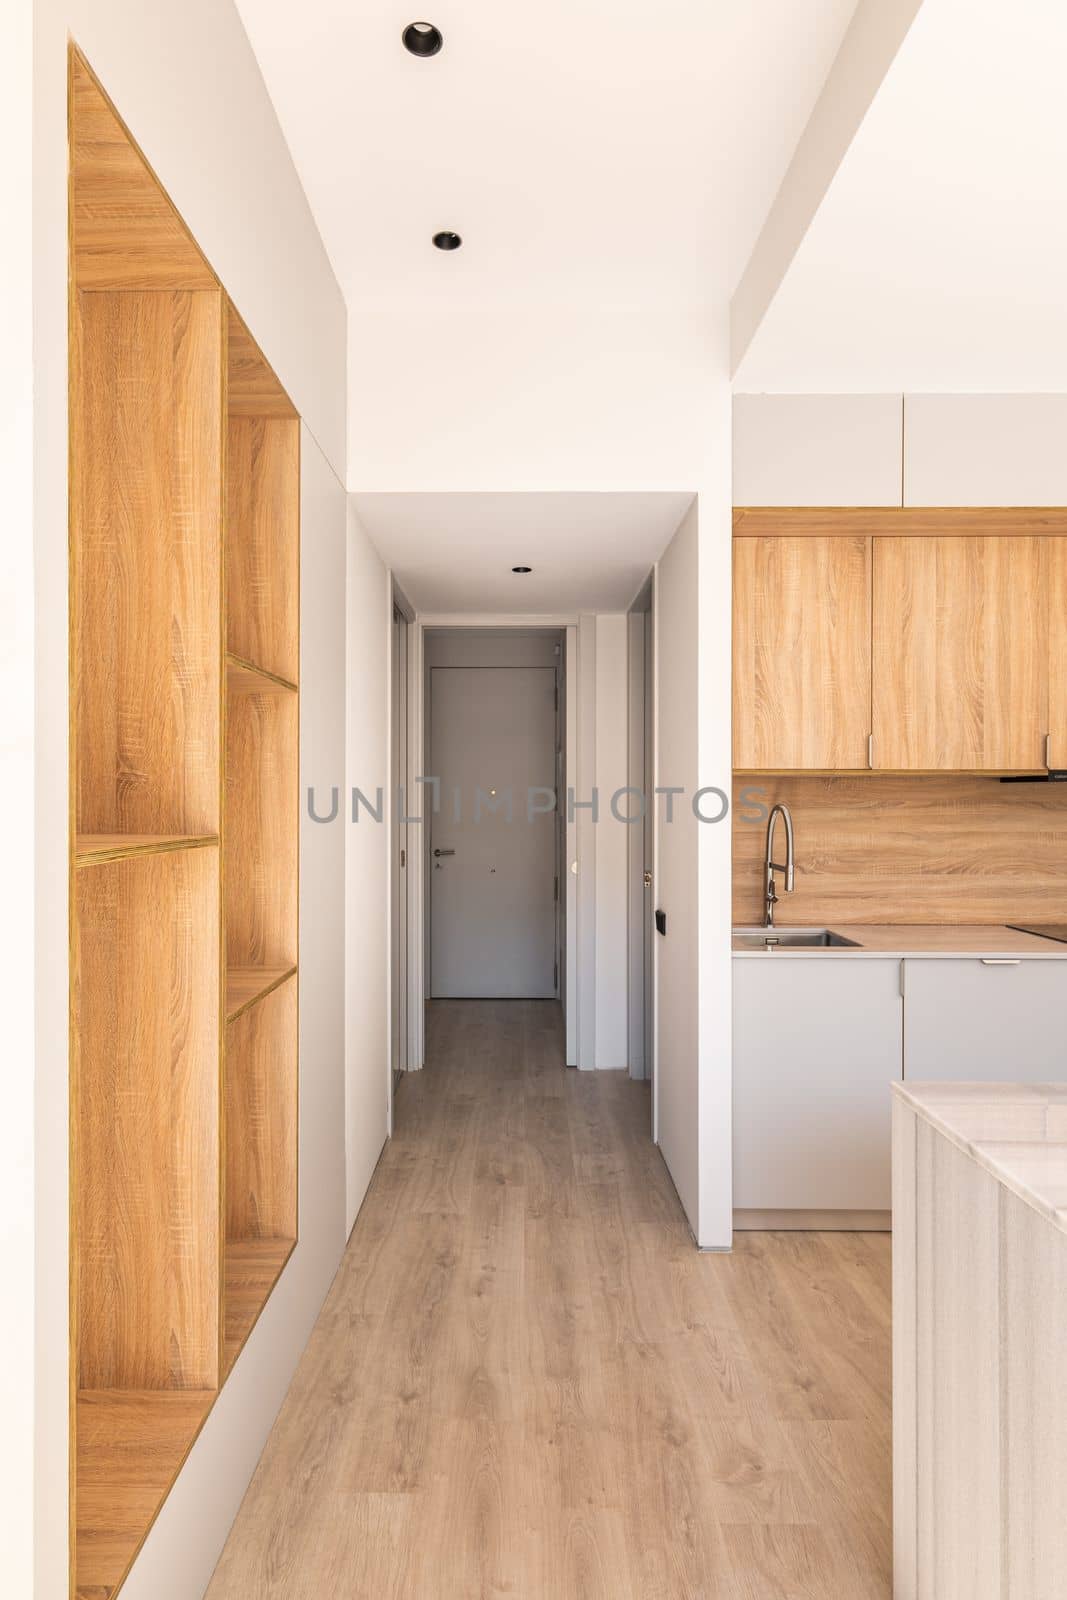 Long passage through kitchen with hardwood floors to another part of house with door on opposite side. Kitchen with light wood furniture. There is built-in wardrobe in wall for household utensils. by apavlin